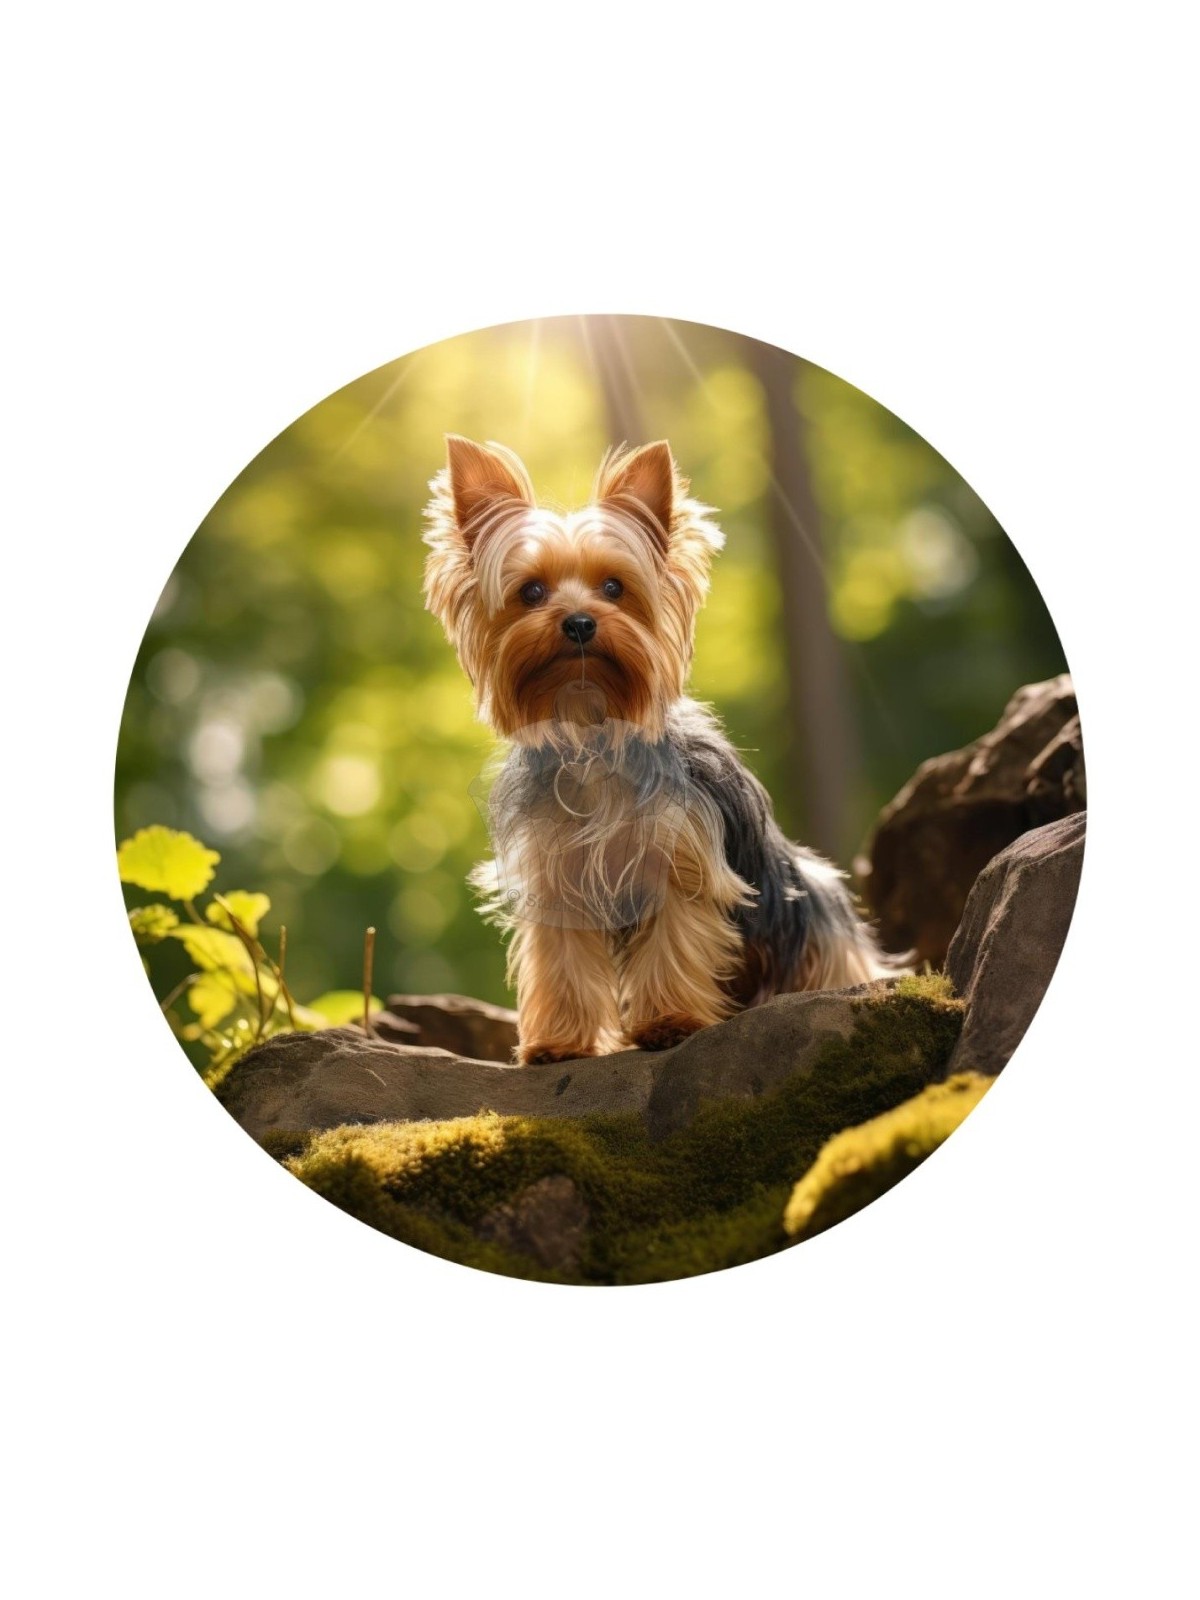 Edible paper "Dogs 17" Yorkshire Terrier 2- A4